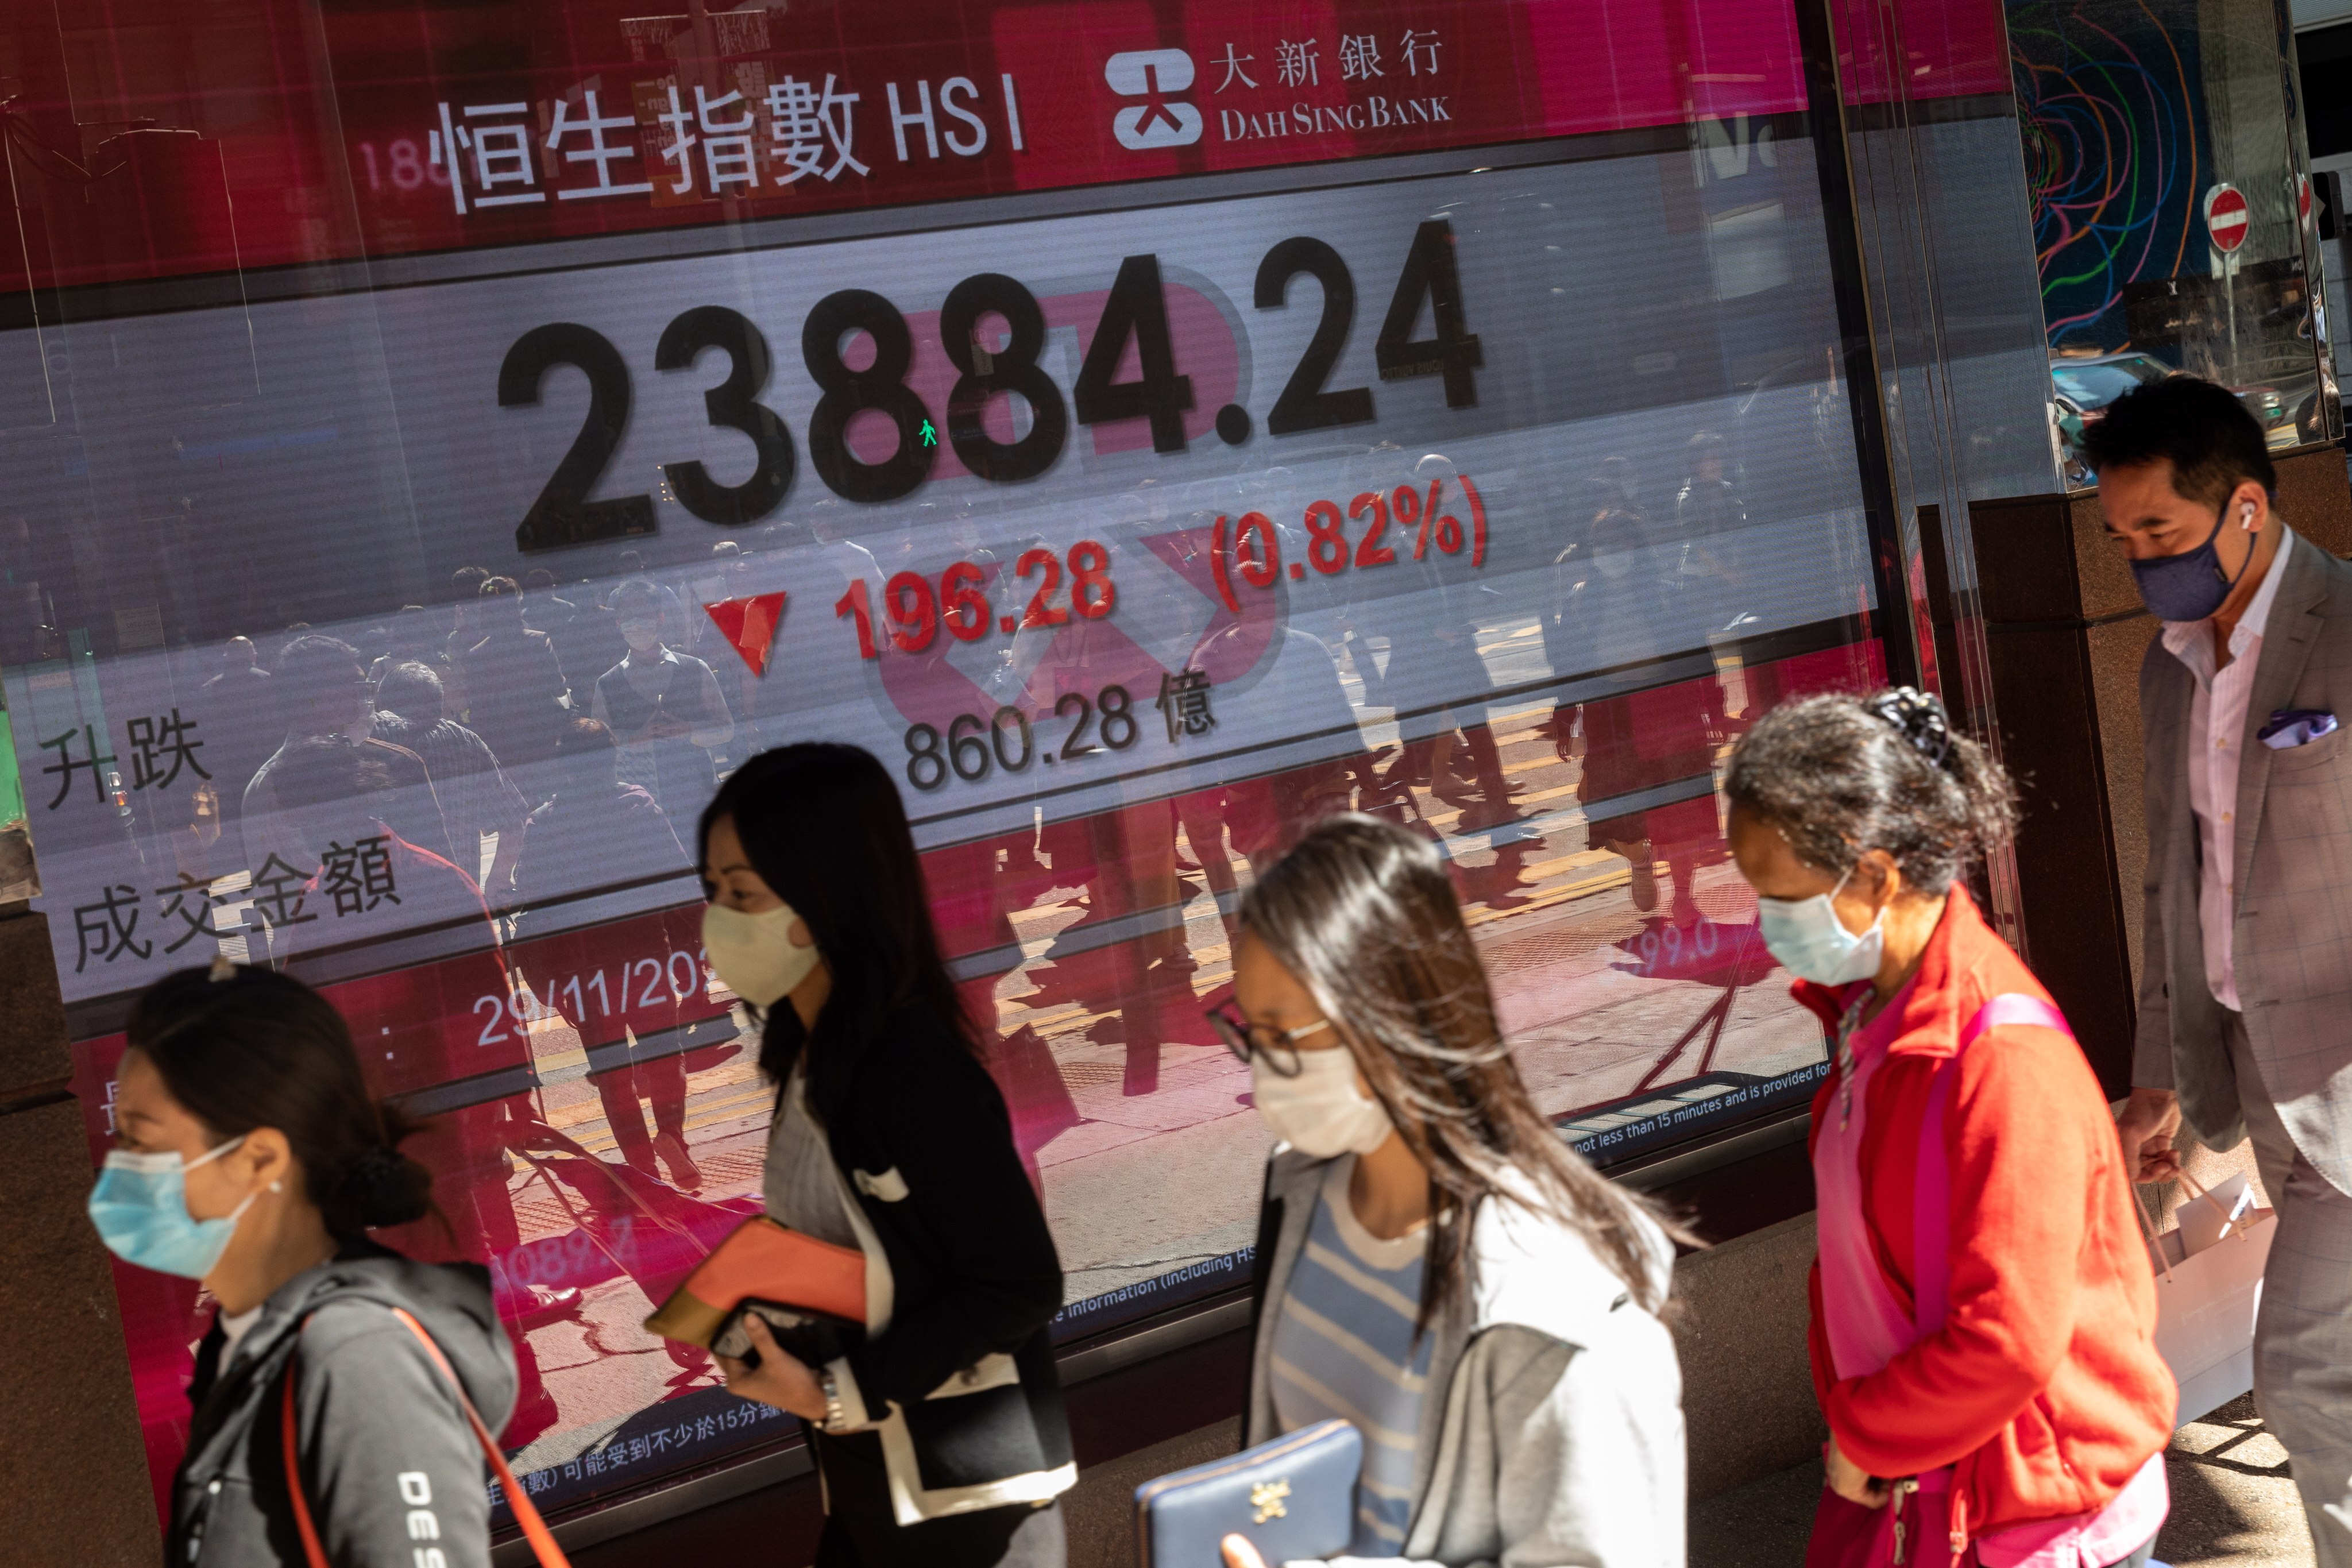 People walk past an electronic board displaying the Hang Seng Index in Hong Kong on November 29. 2021 has been a good year for global stocks, but as many investors in Asia know, not every region’s equity market had such a good year. Photo: EPA-EFE